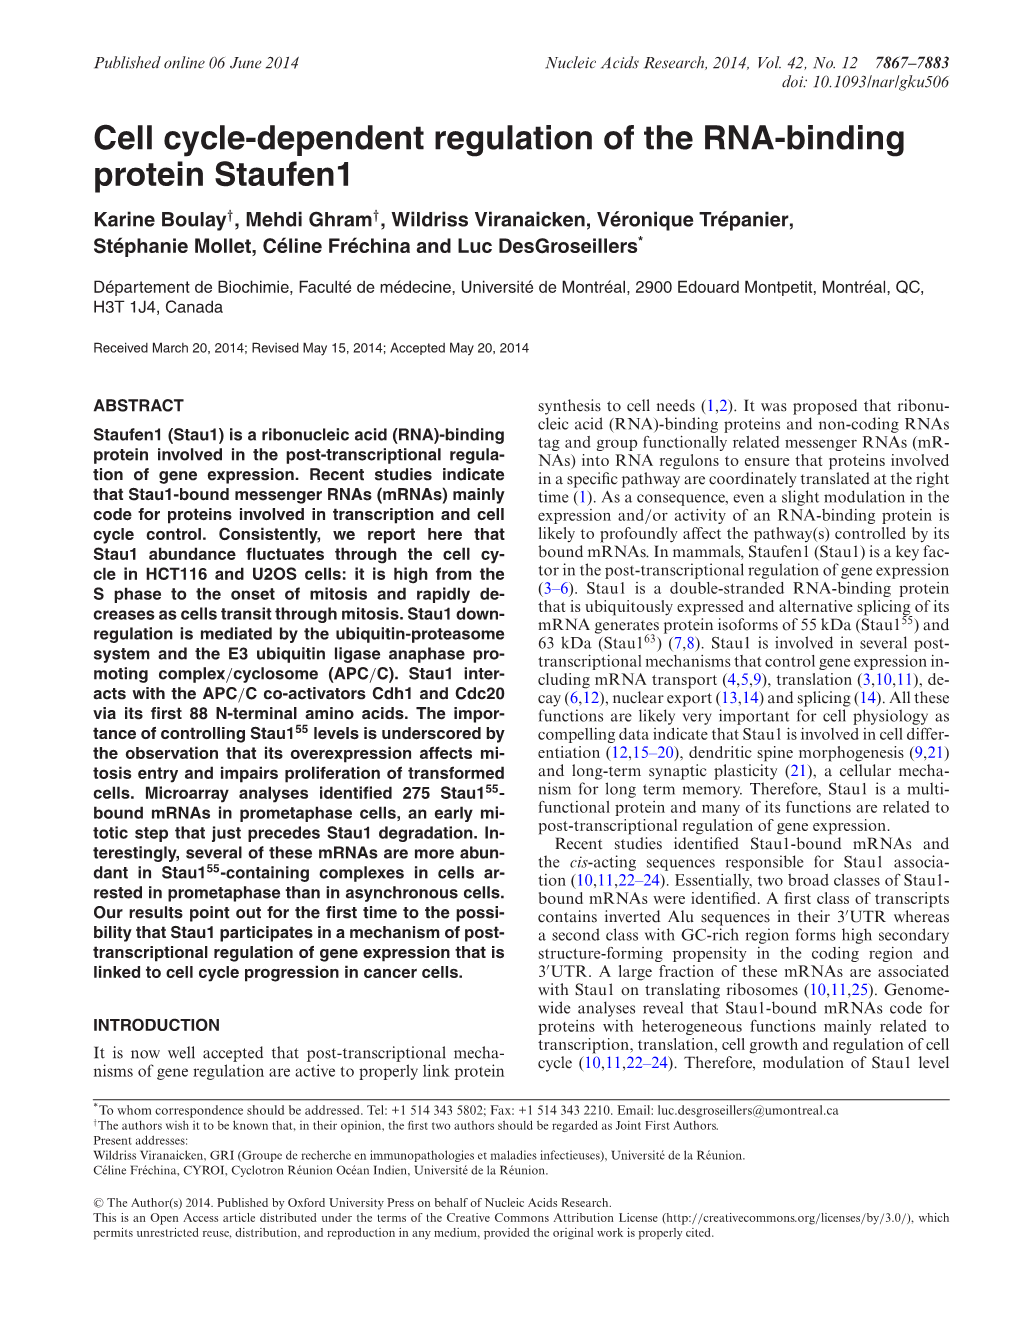 Cell Cycle-Dependent Regulation of the RNA-Binding Protein Staufen1